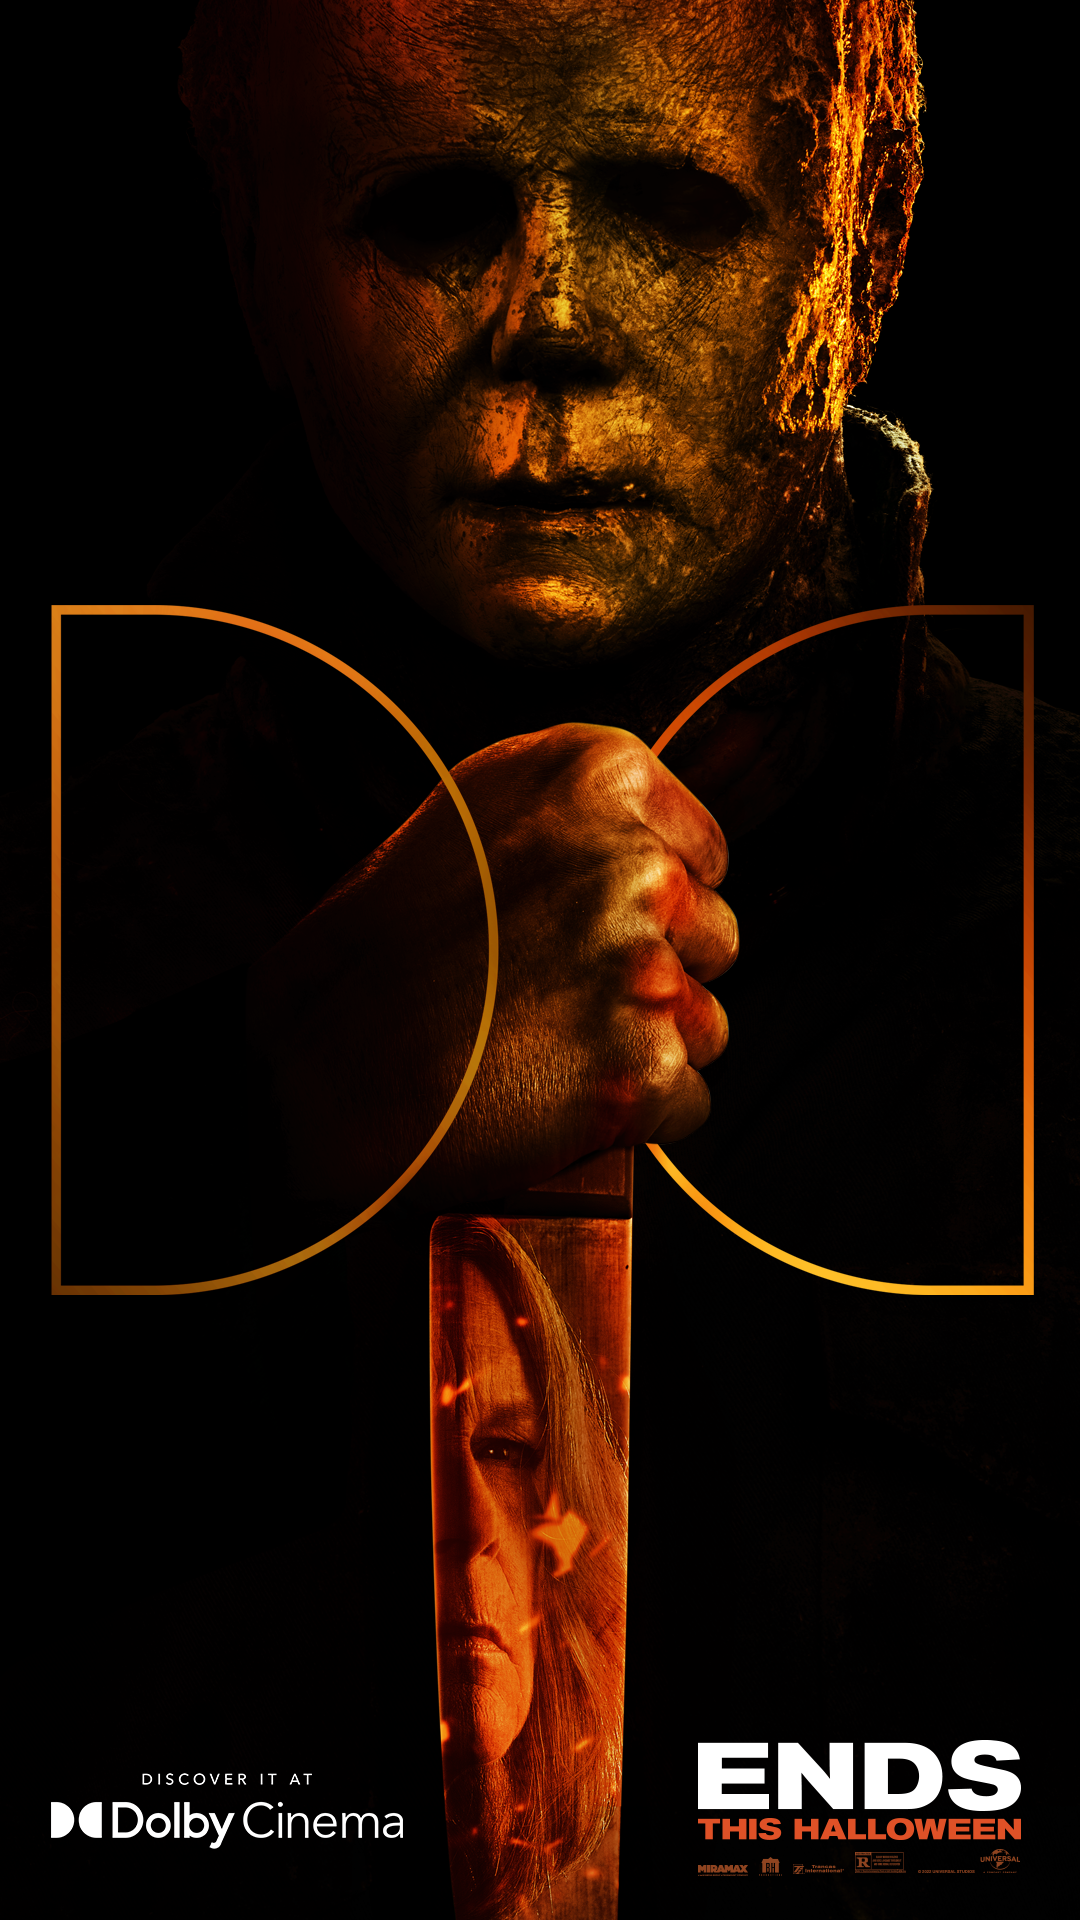 Halloween Ends - Dolby Cinema Exclusive Art Poster